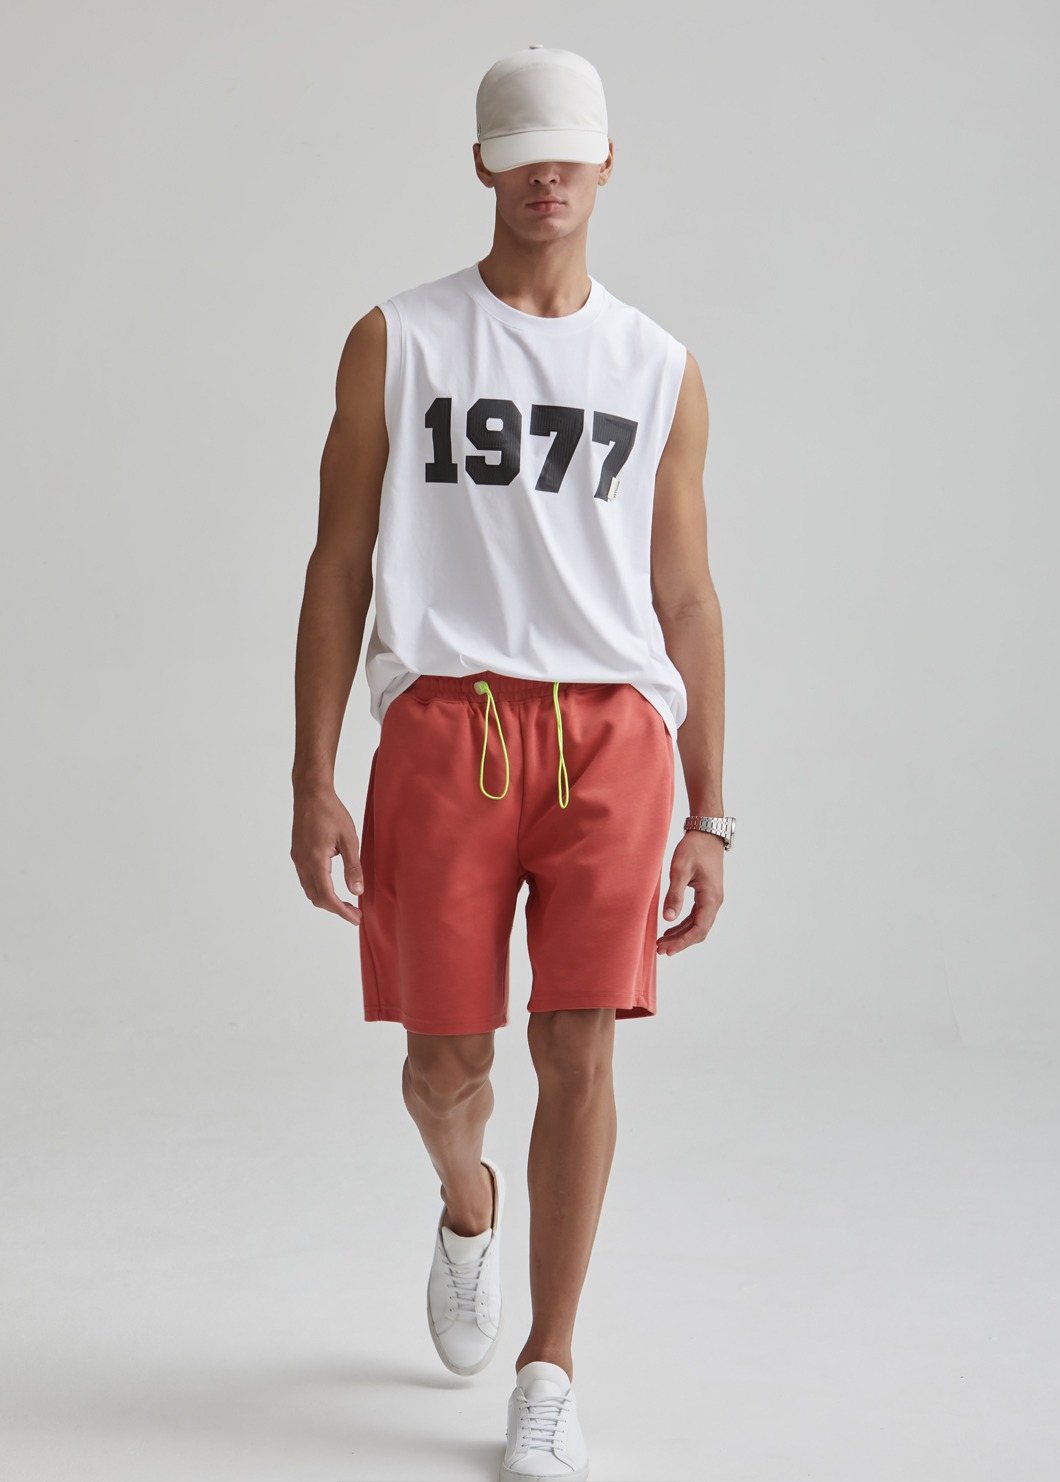 1977 CLASSIC Sleeveless Top-5color